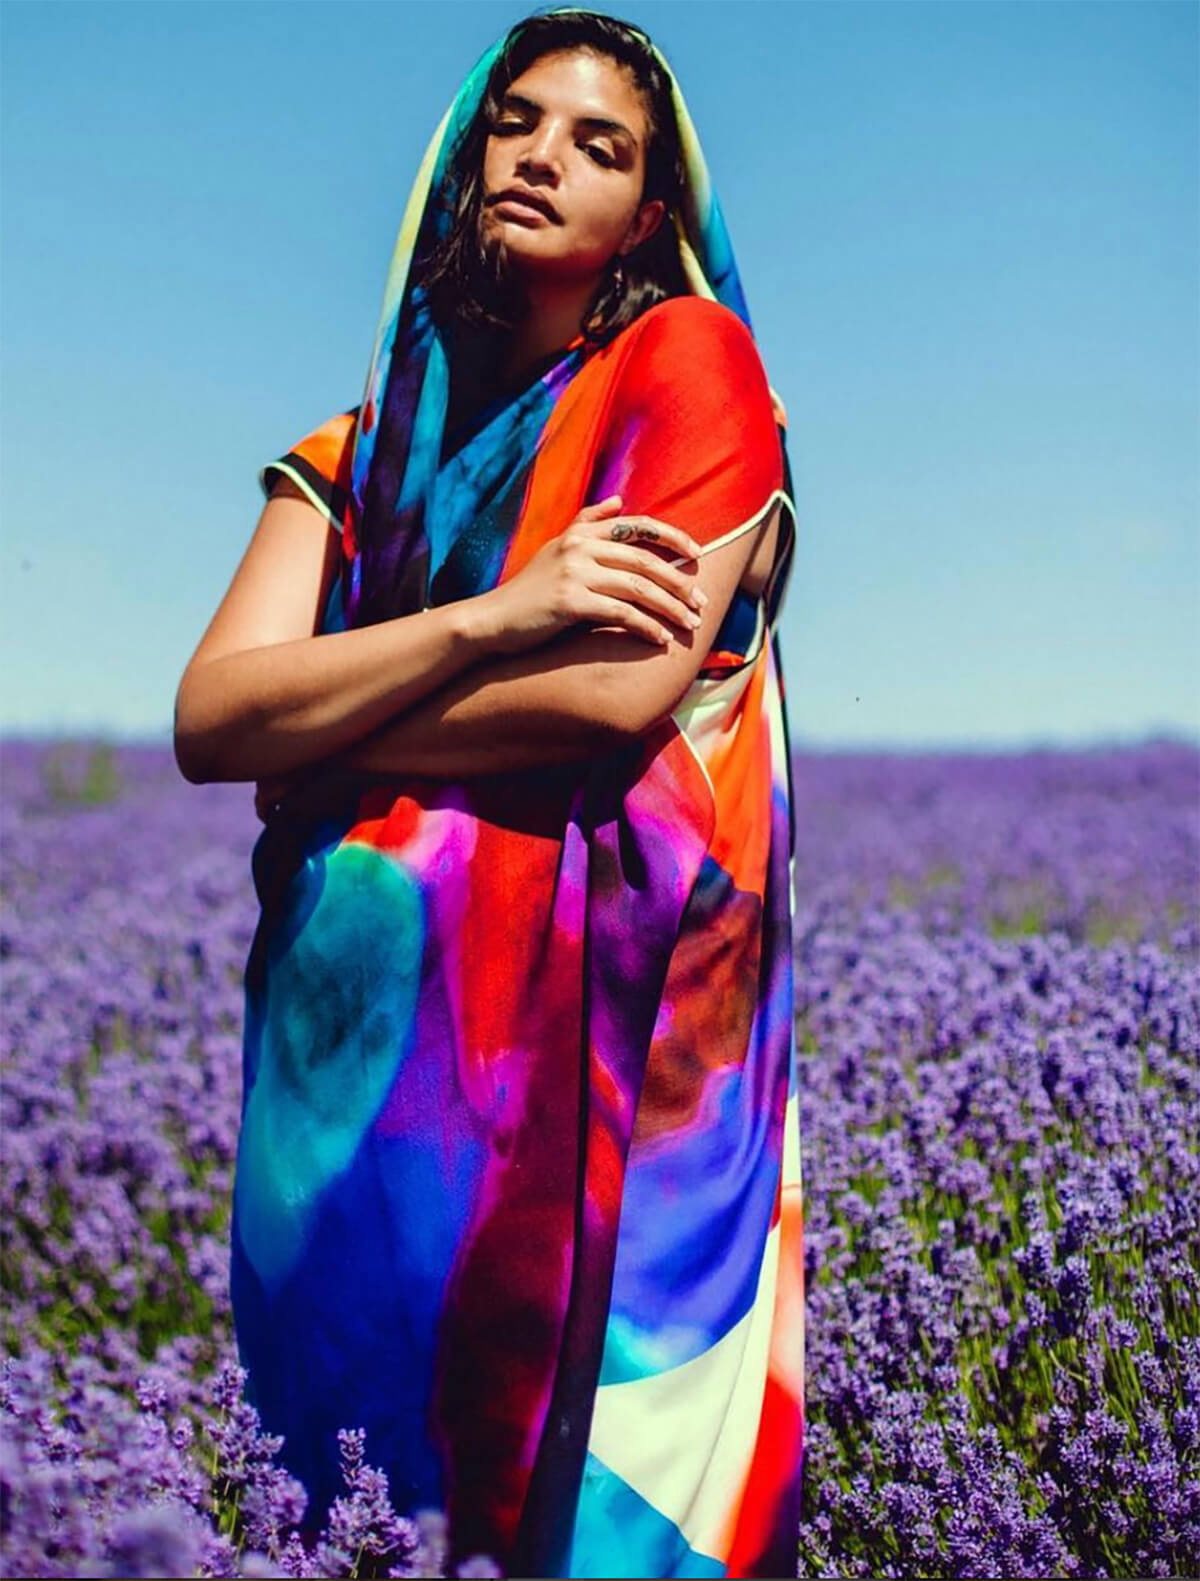 Model standing in lavender field wrapped in colourful shawl